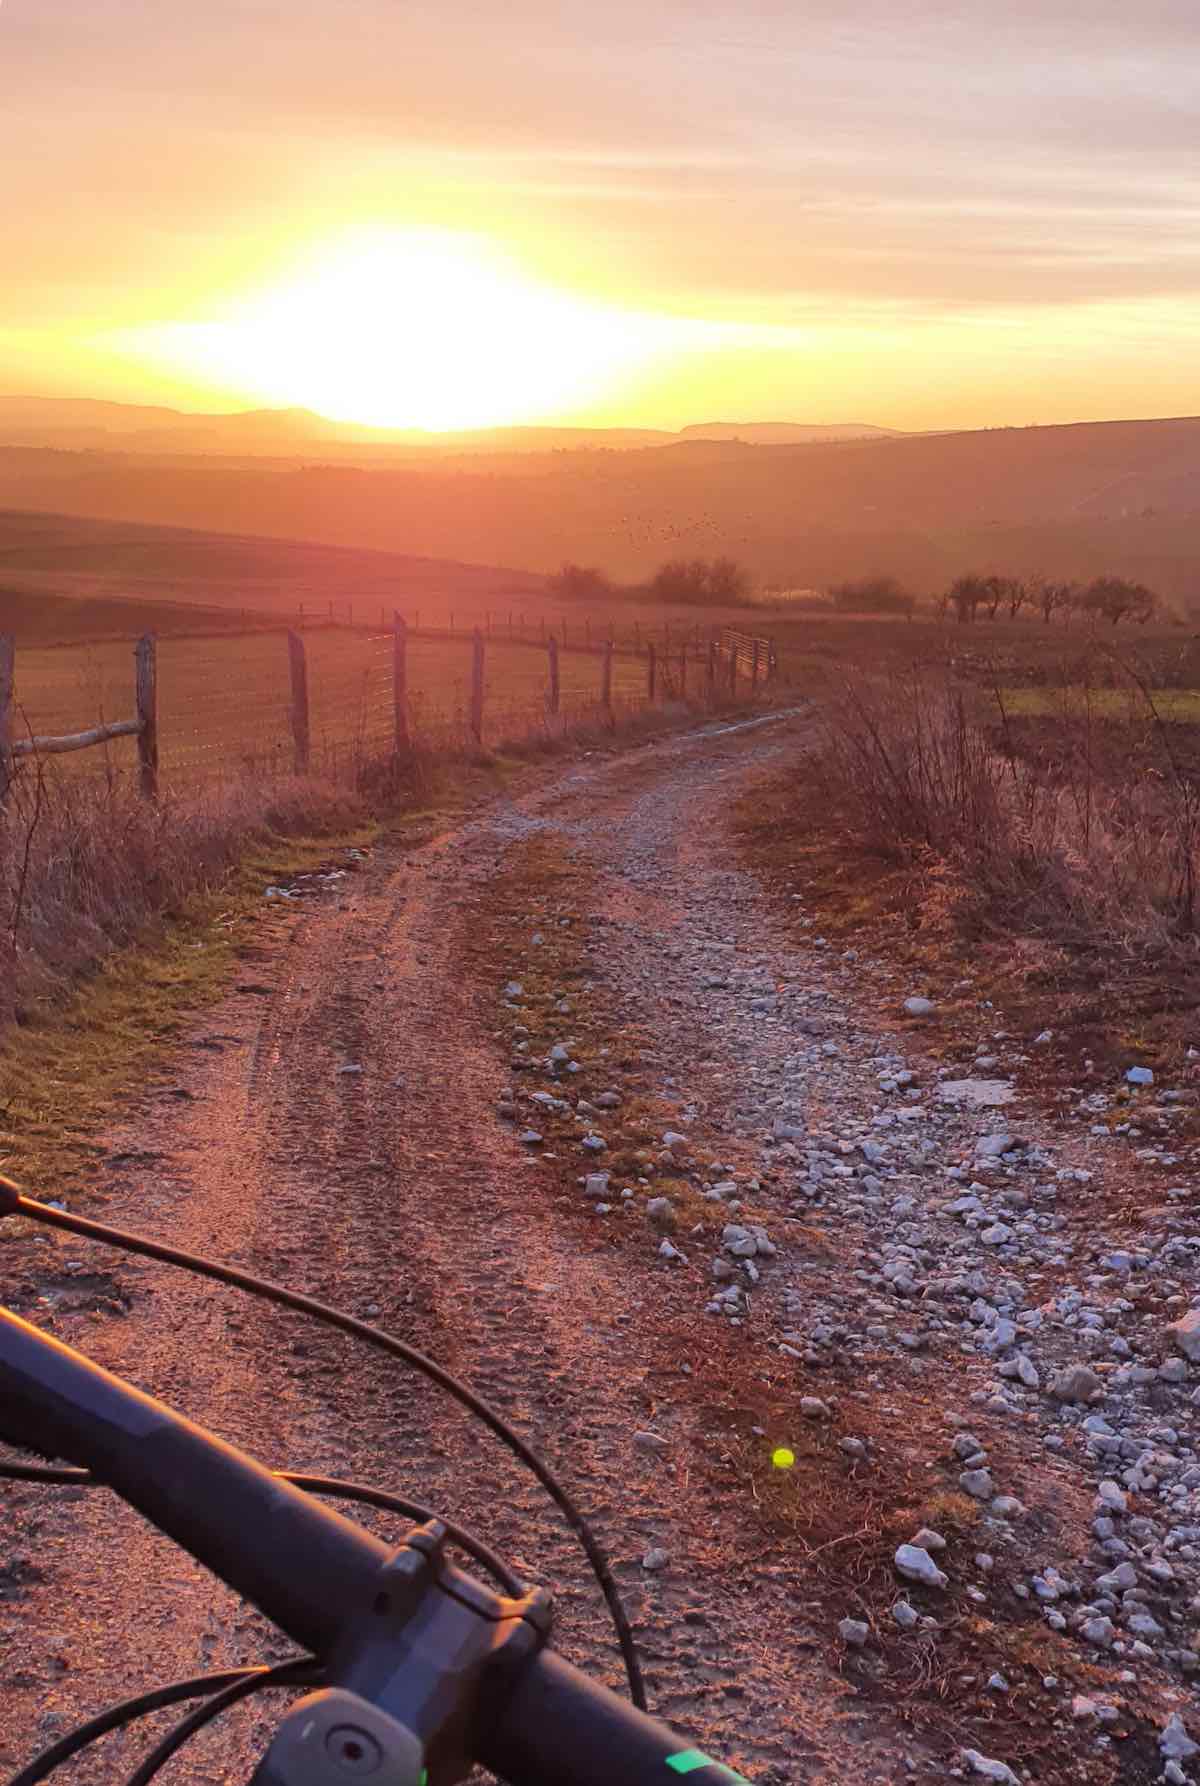 bikerumor pic of the day sunset in the horizon as mountain bike rides along dirt and gravel road in Slovakia, district Myjava.